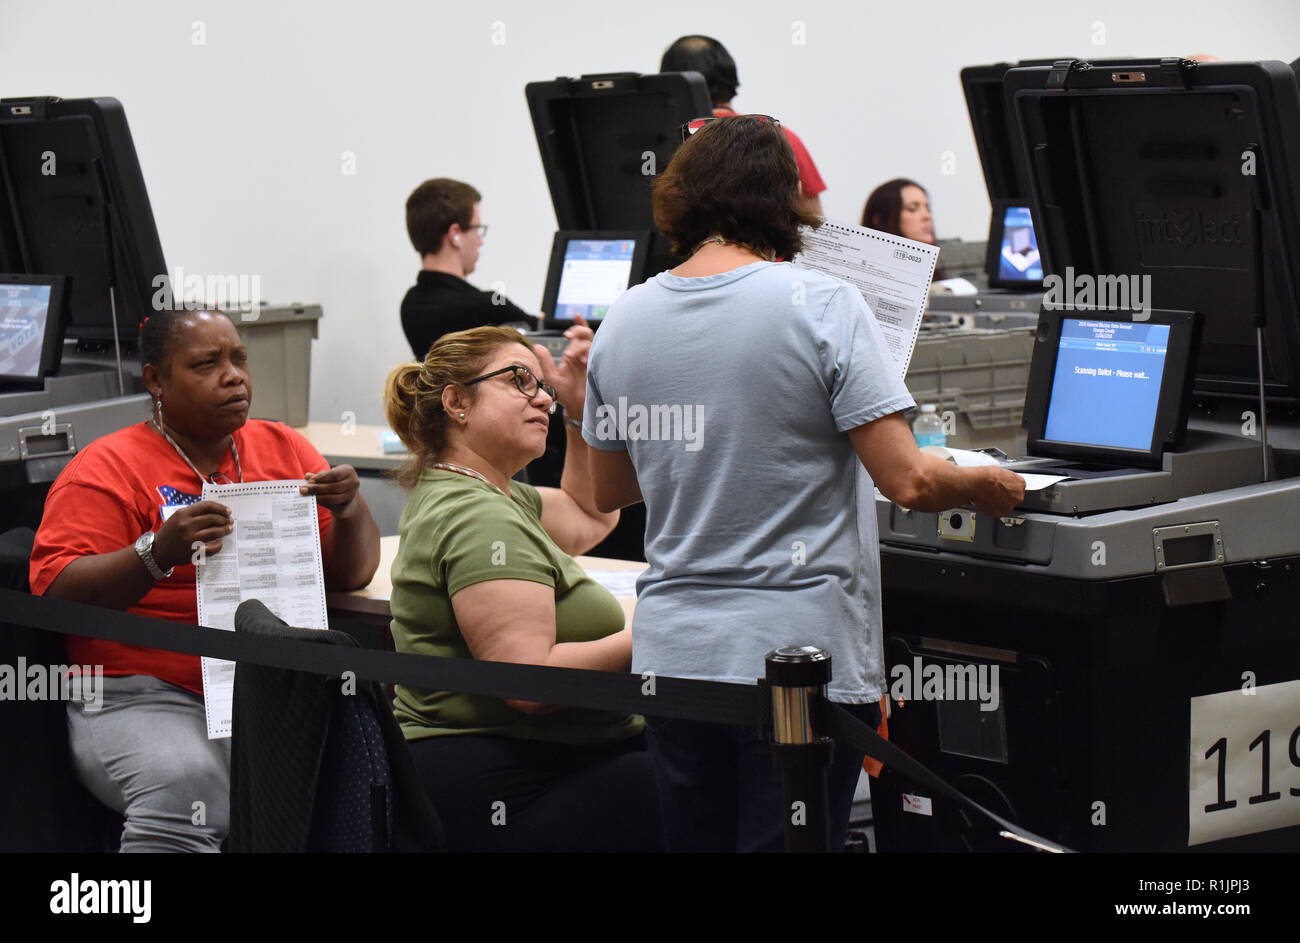 Orlando, Florida, USA. November 12, 2018 - Orlando, Florida, United States - Election workers scan ballots as a recount begins on November 12, 2018 at the Orange County Supervisor of Elections Office in Orlando, Florida. A statewide vote recount is being conducted to determine the winners of the races for governor, U.S. senate, and agriculture commissioner. (Paul Hennessy/Alamy) Credit: Paul Hennessy/Alamy Live News Stock Photo